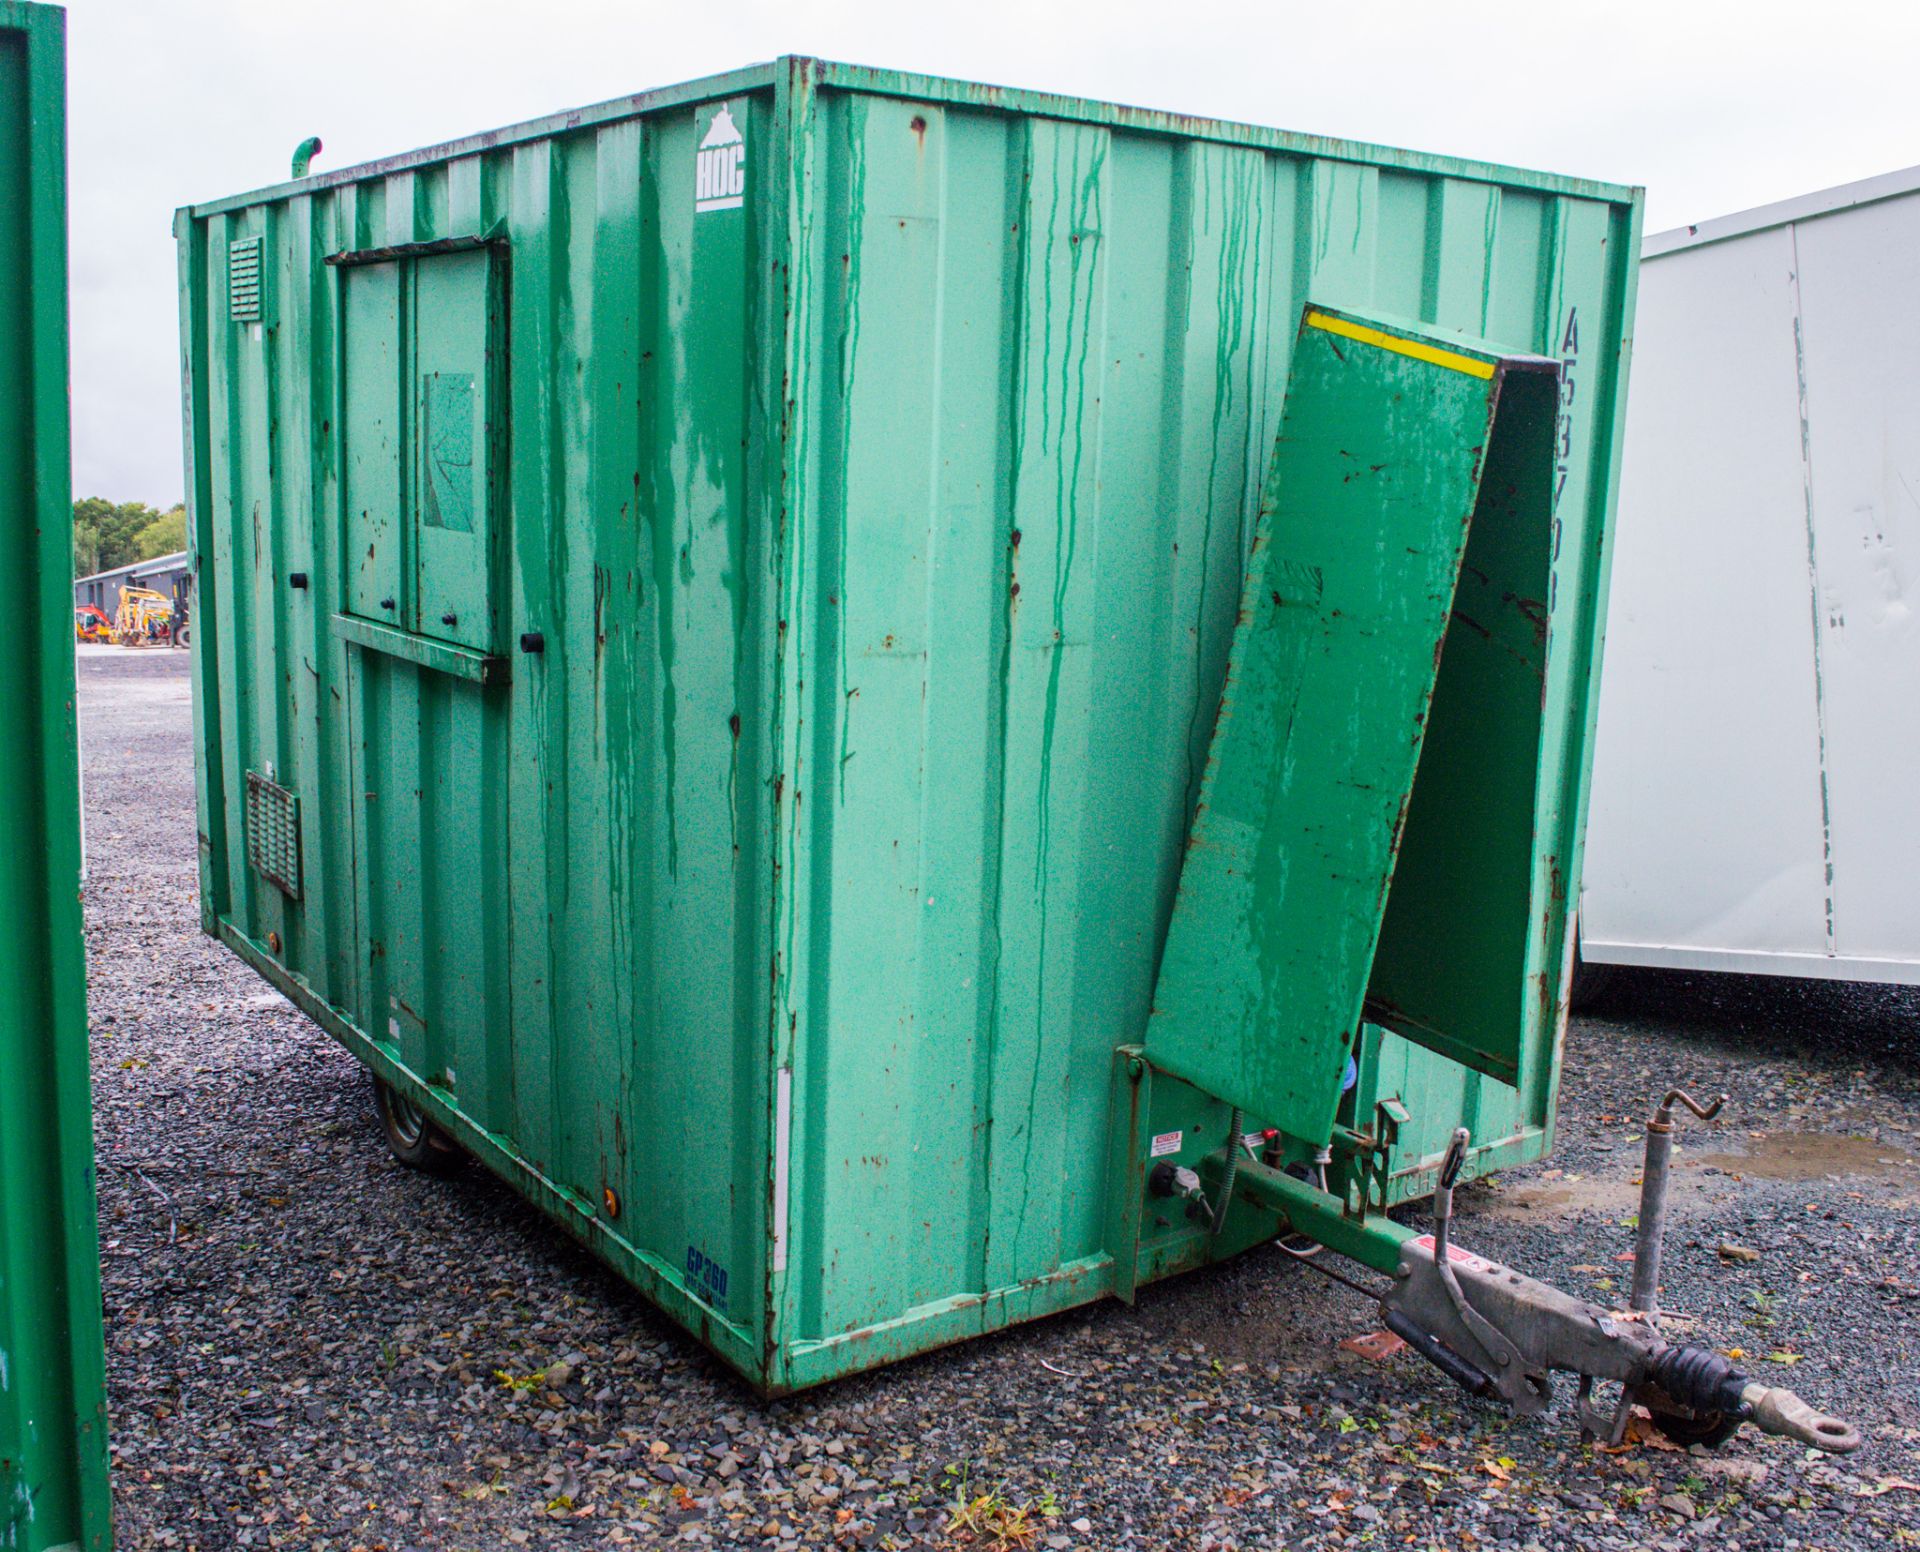 Ground Hog 12' by 8' fast tow self lowering welfare unit c/w canteen area, toilet room, generator - Image 2 of 13